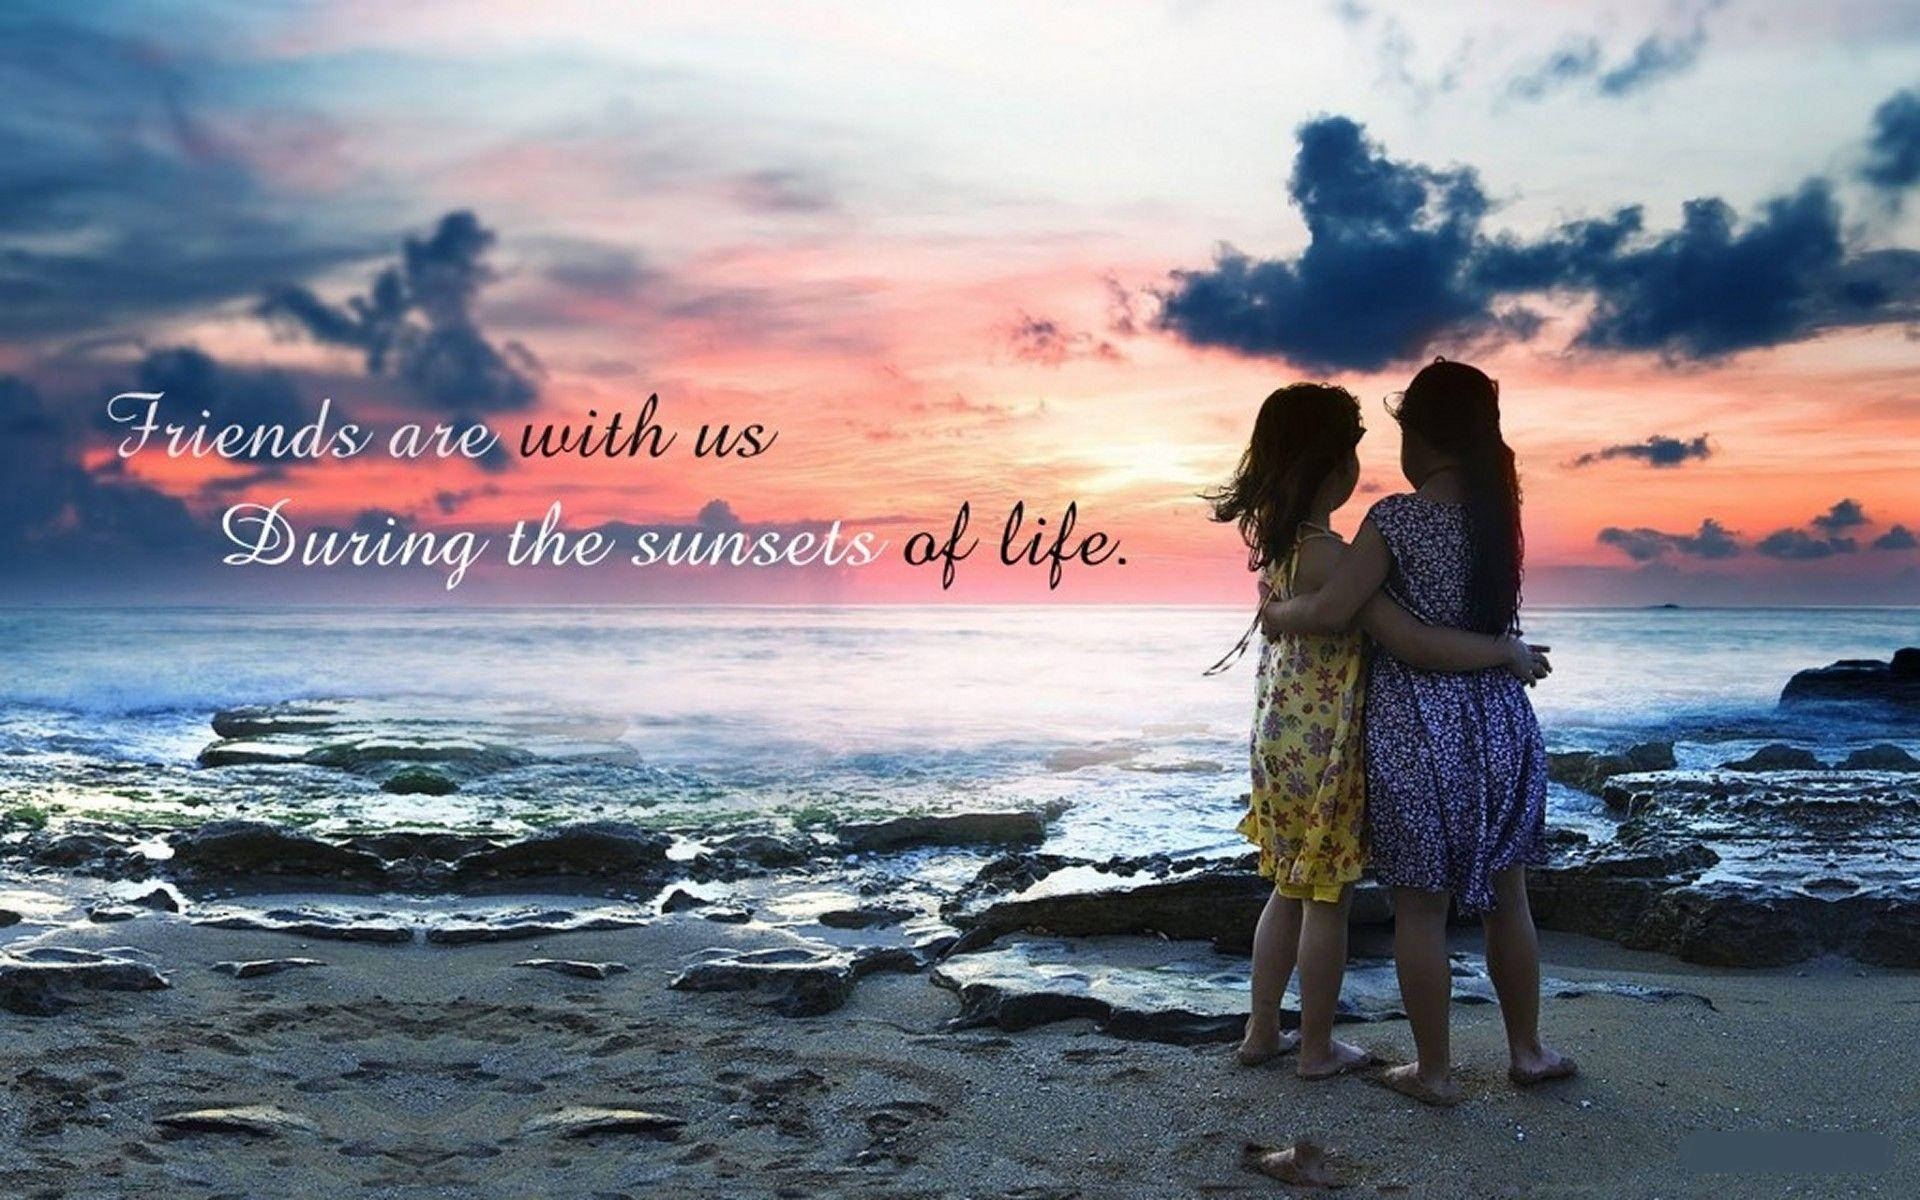 Free Friendship Quotes Wallpaper Downloads, [100+] Friendship Quotes  Wallpapers for FREE 